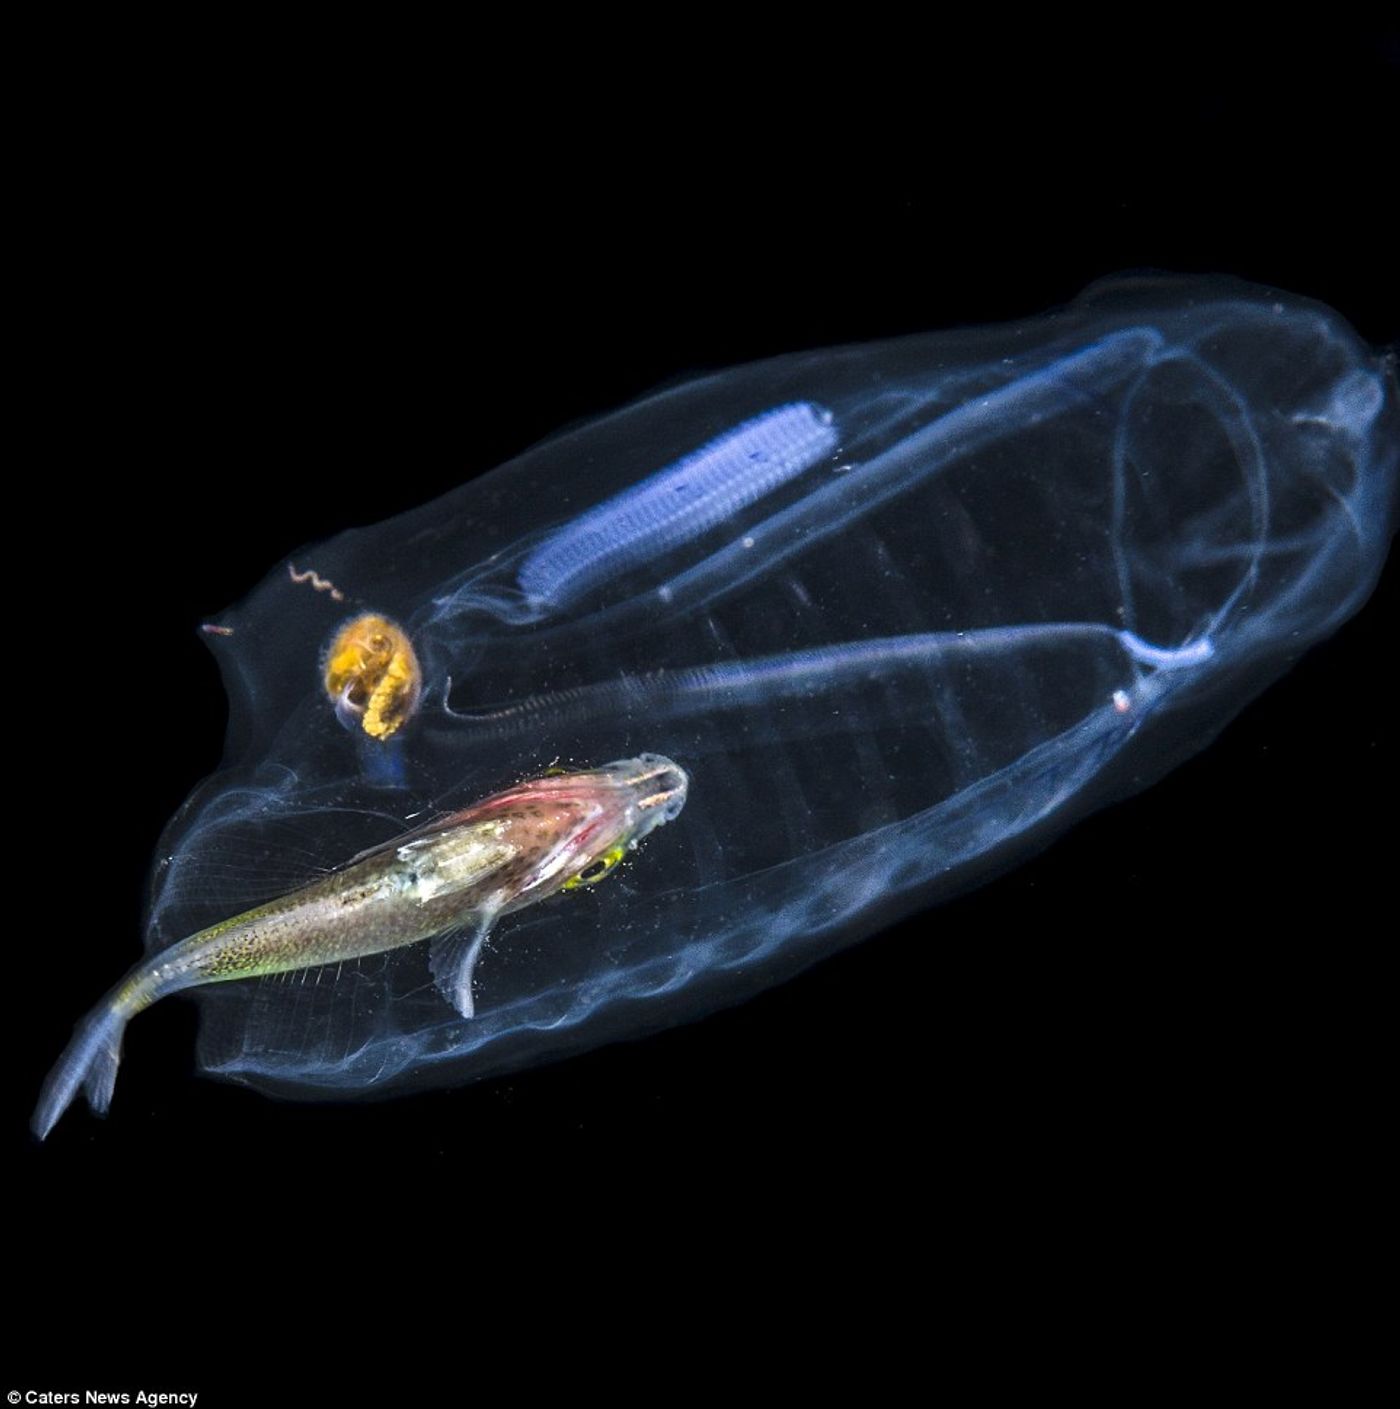 Diver Wayne MacWilliams shot this picture of a translucent sea creature and found a shimmering fish inside of it.